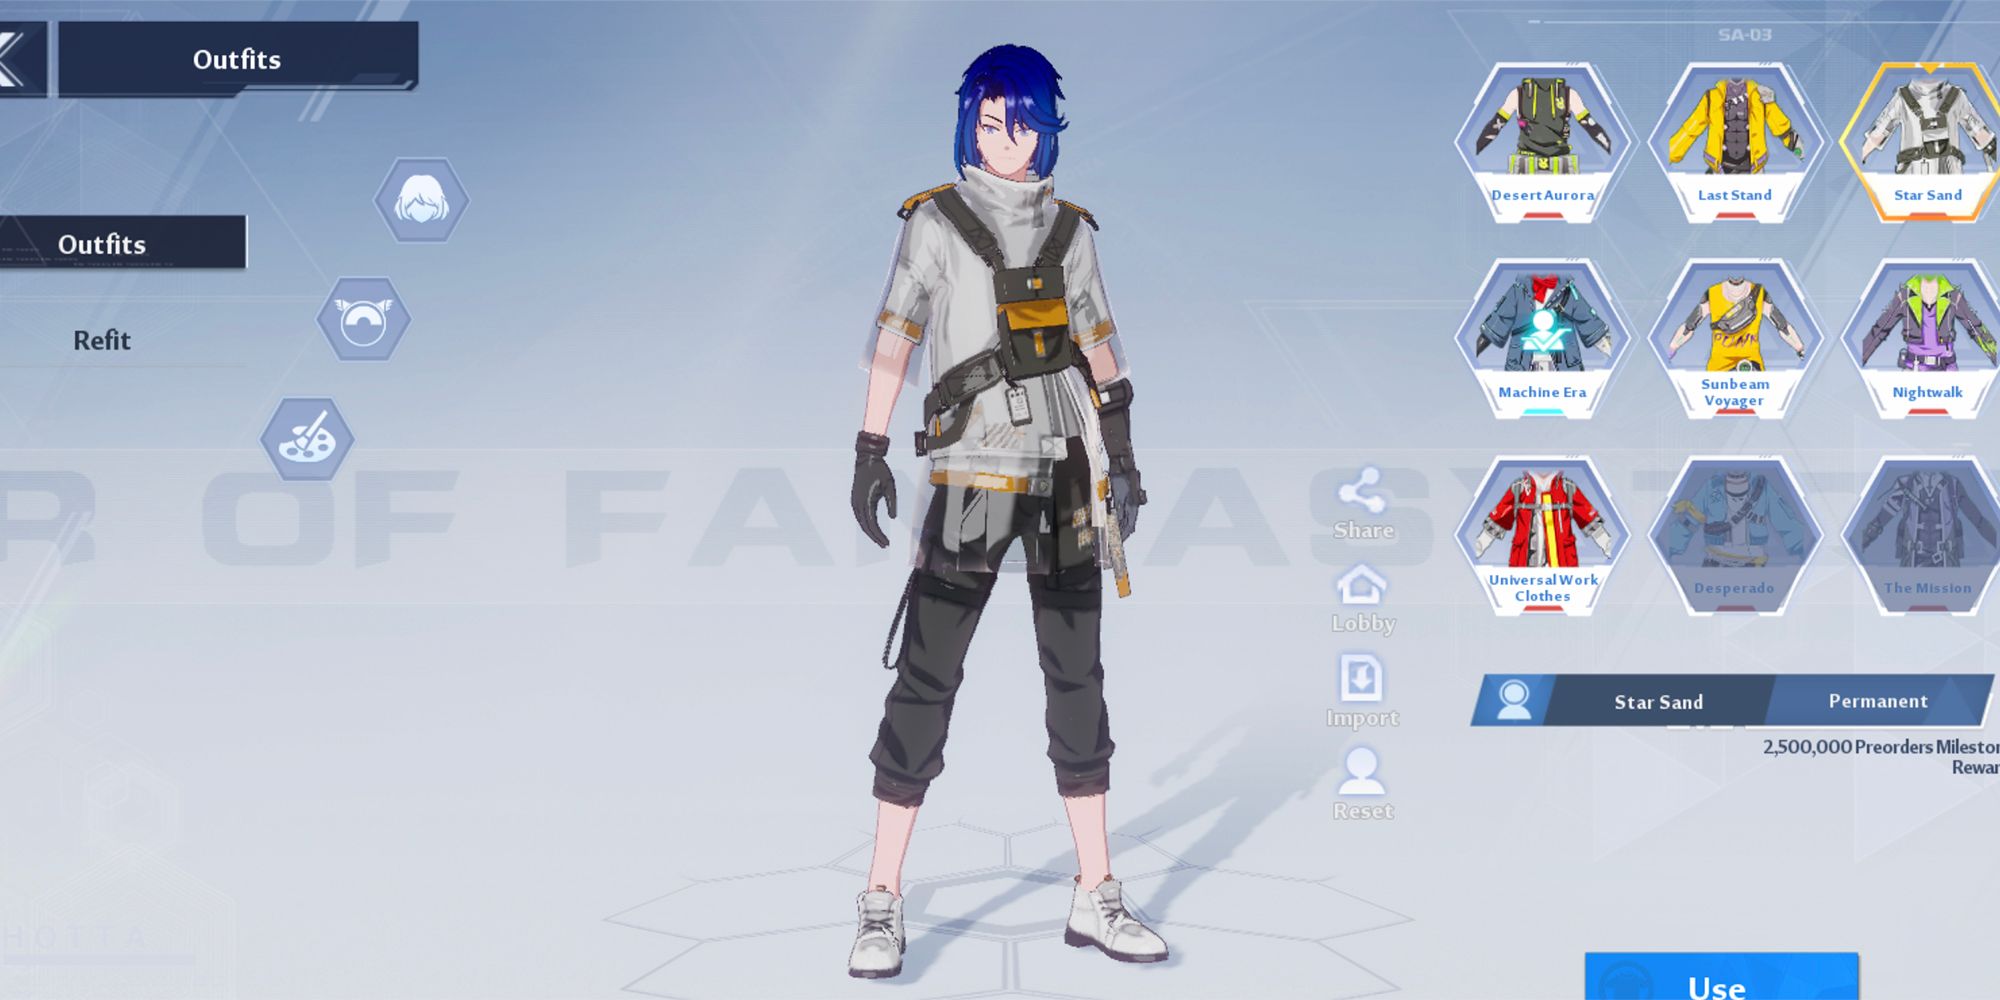 changing your avatars equipped outfit